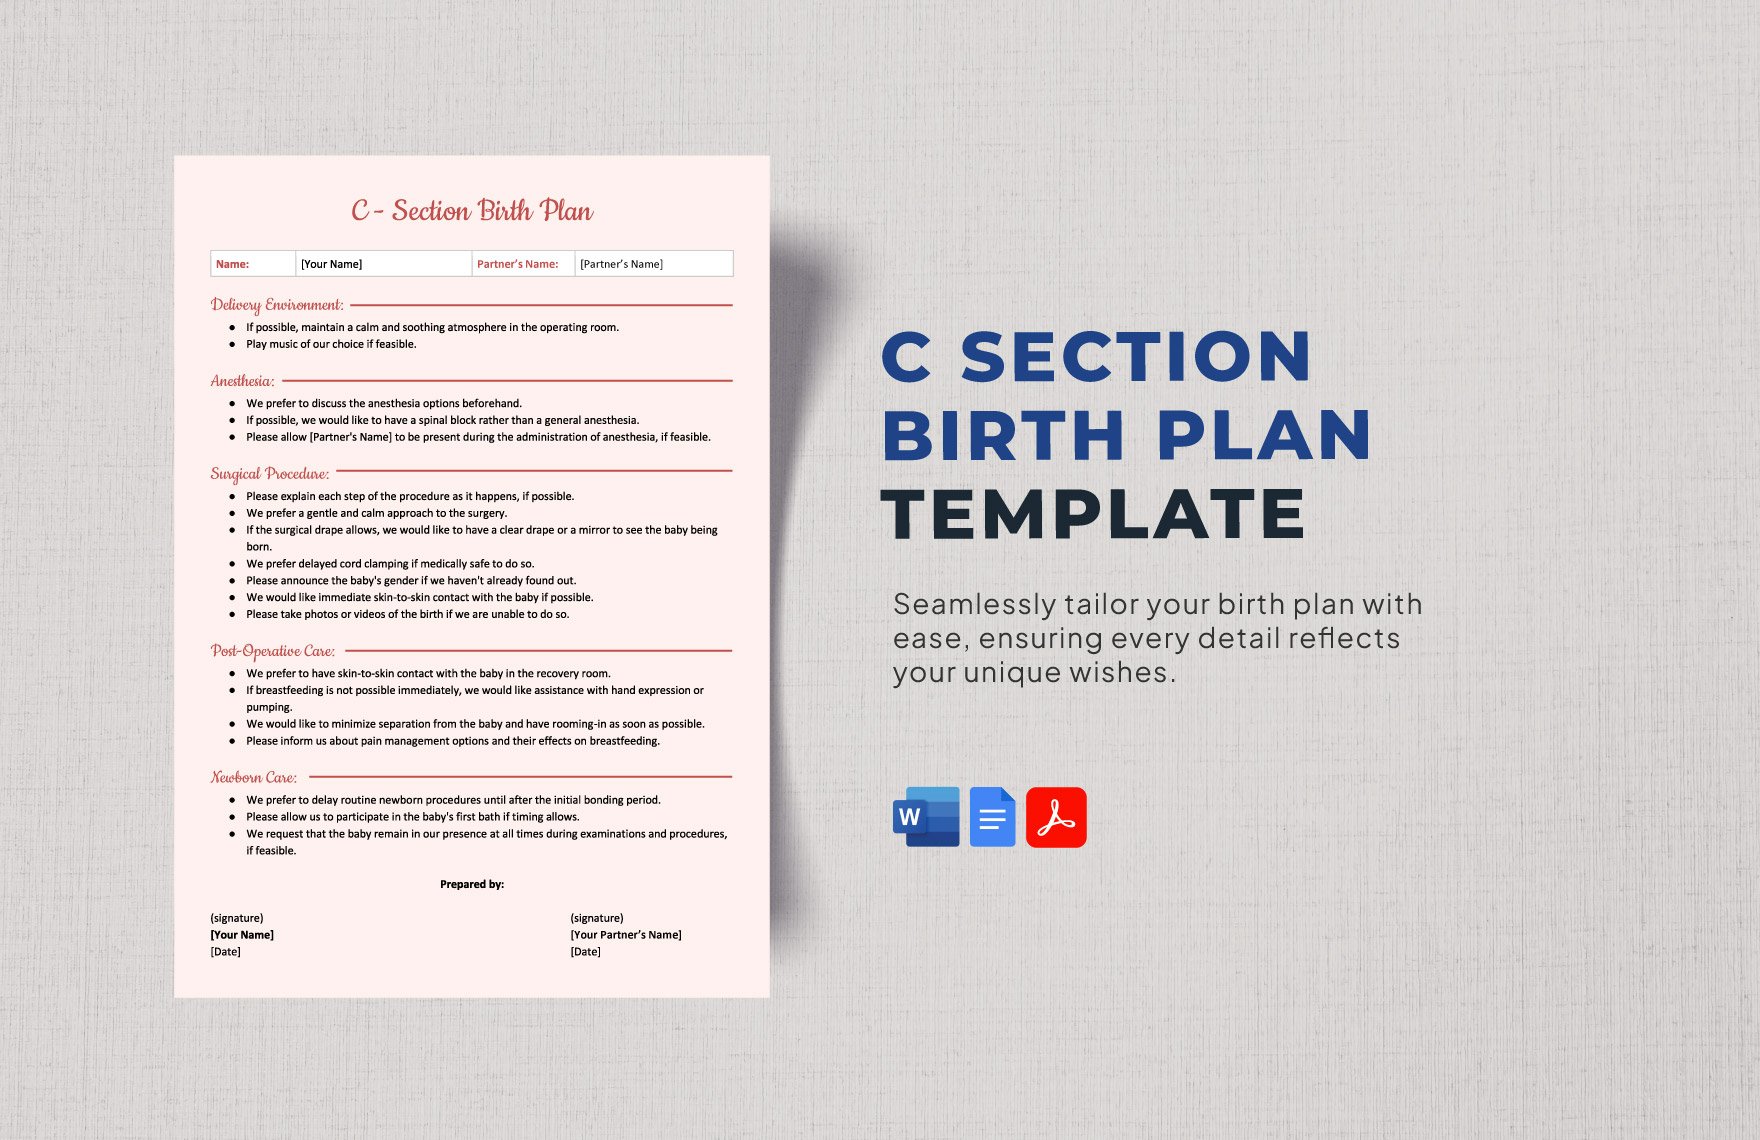 C Section Birth Plan Template in Word, Google Docs, PDF